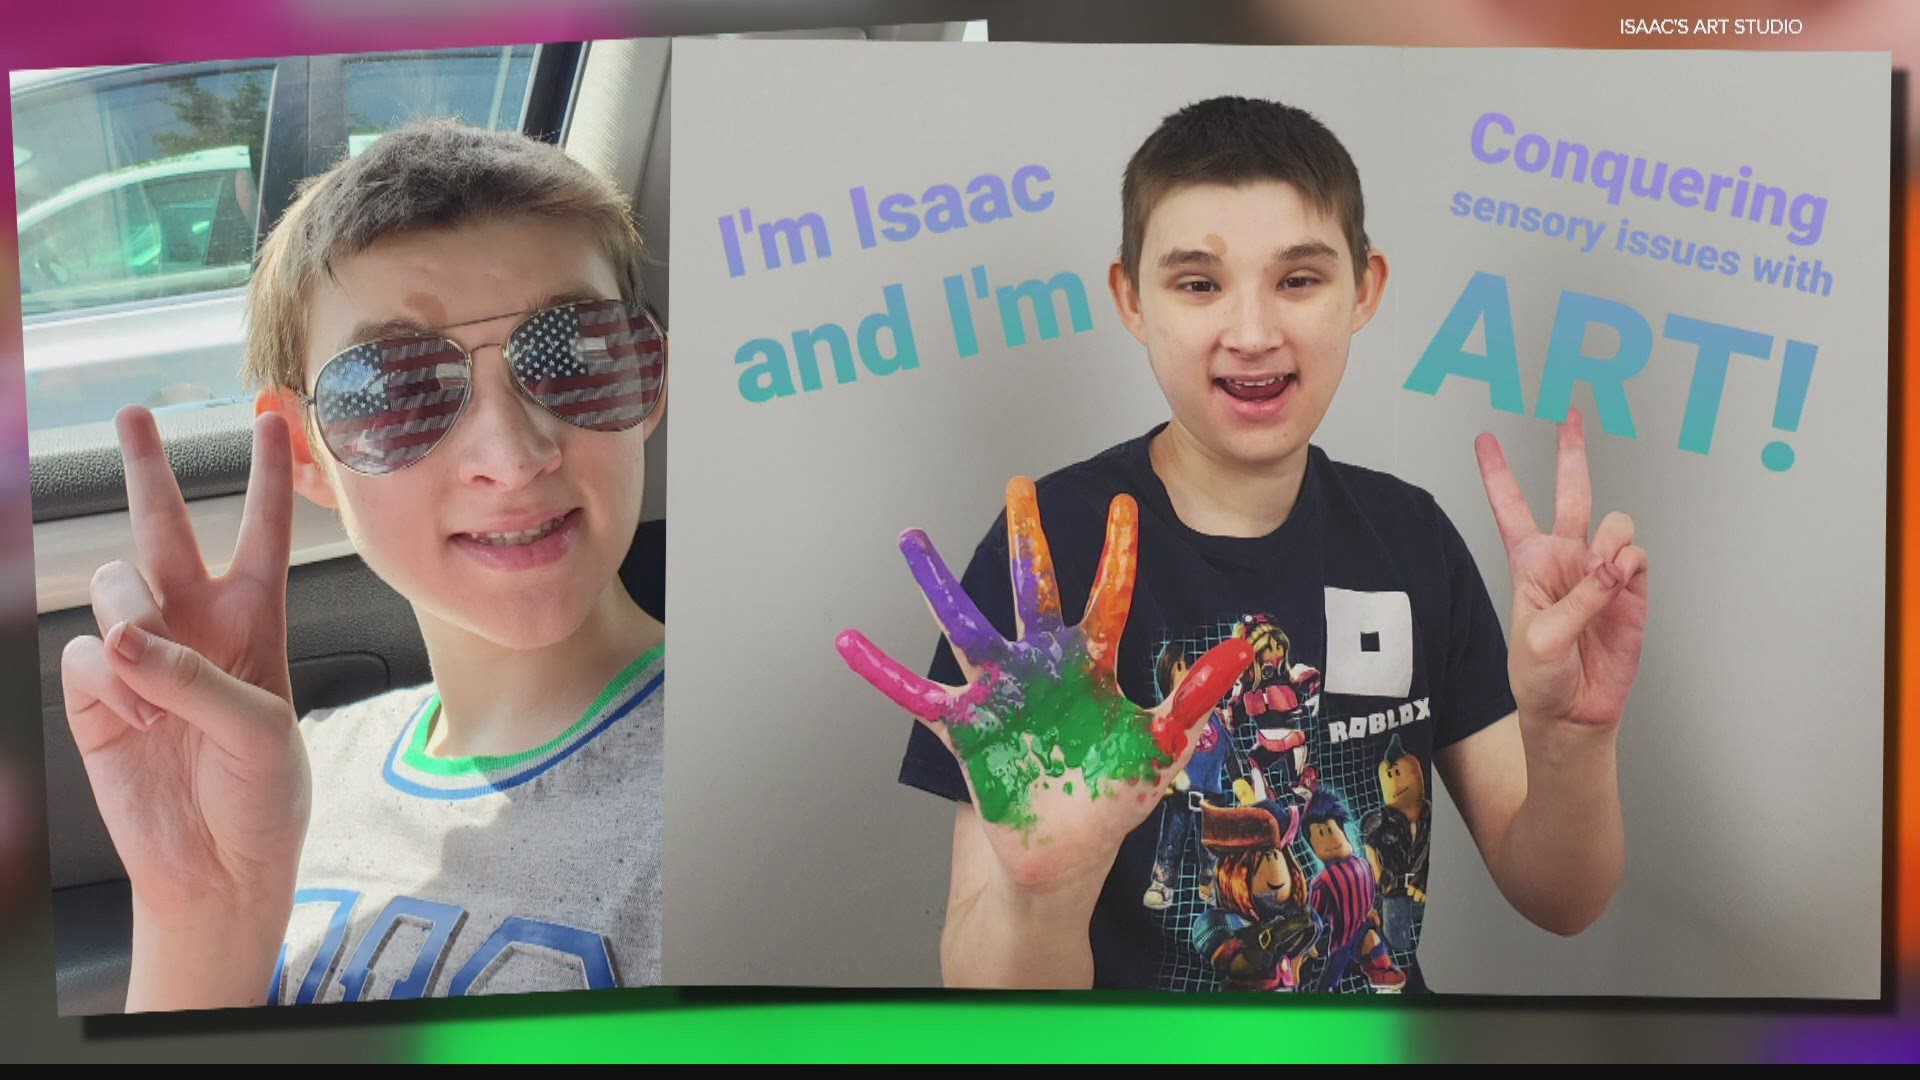 13-year-old Isaac Stark, a student, artist and YouTuber, wants people to find their artistic side.